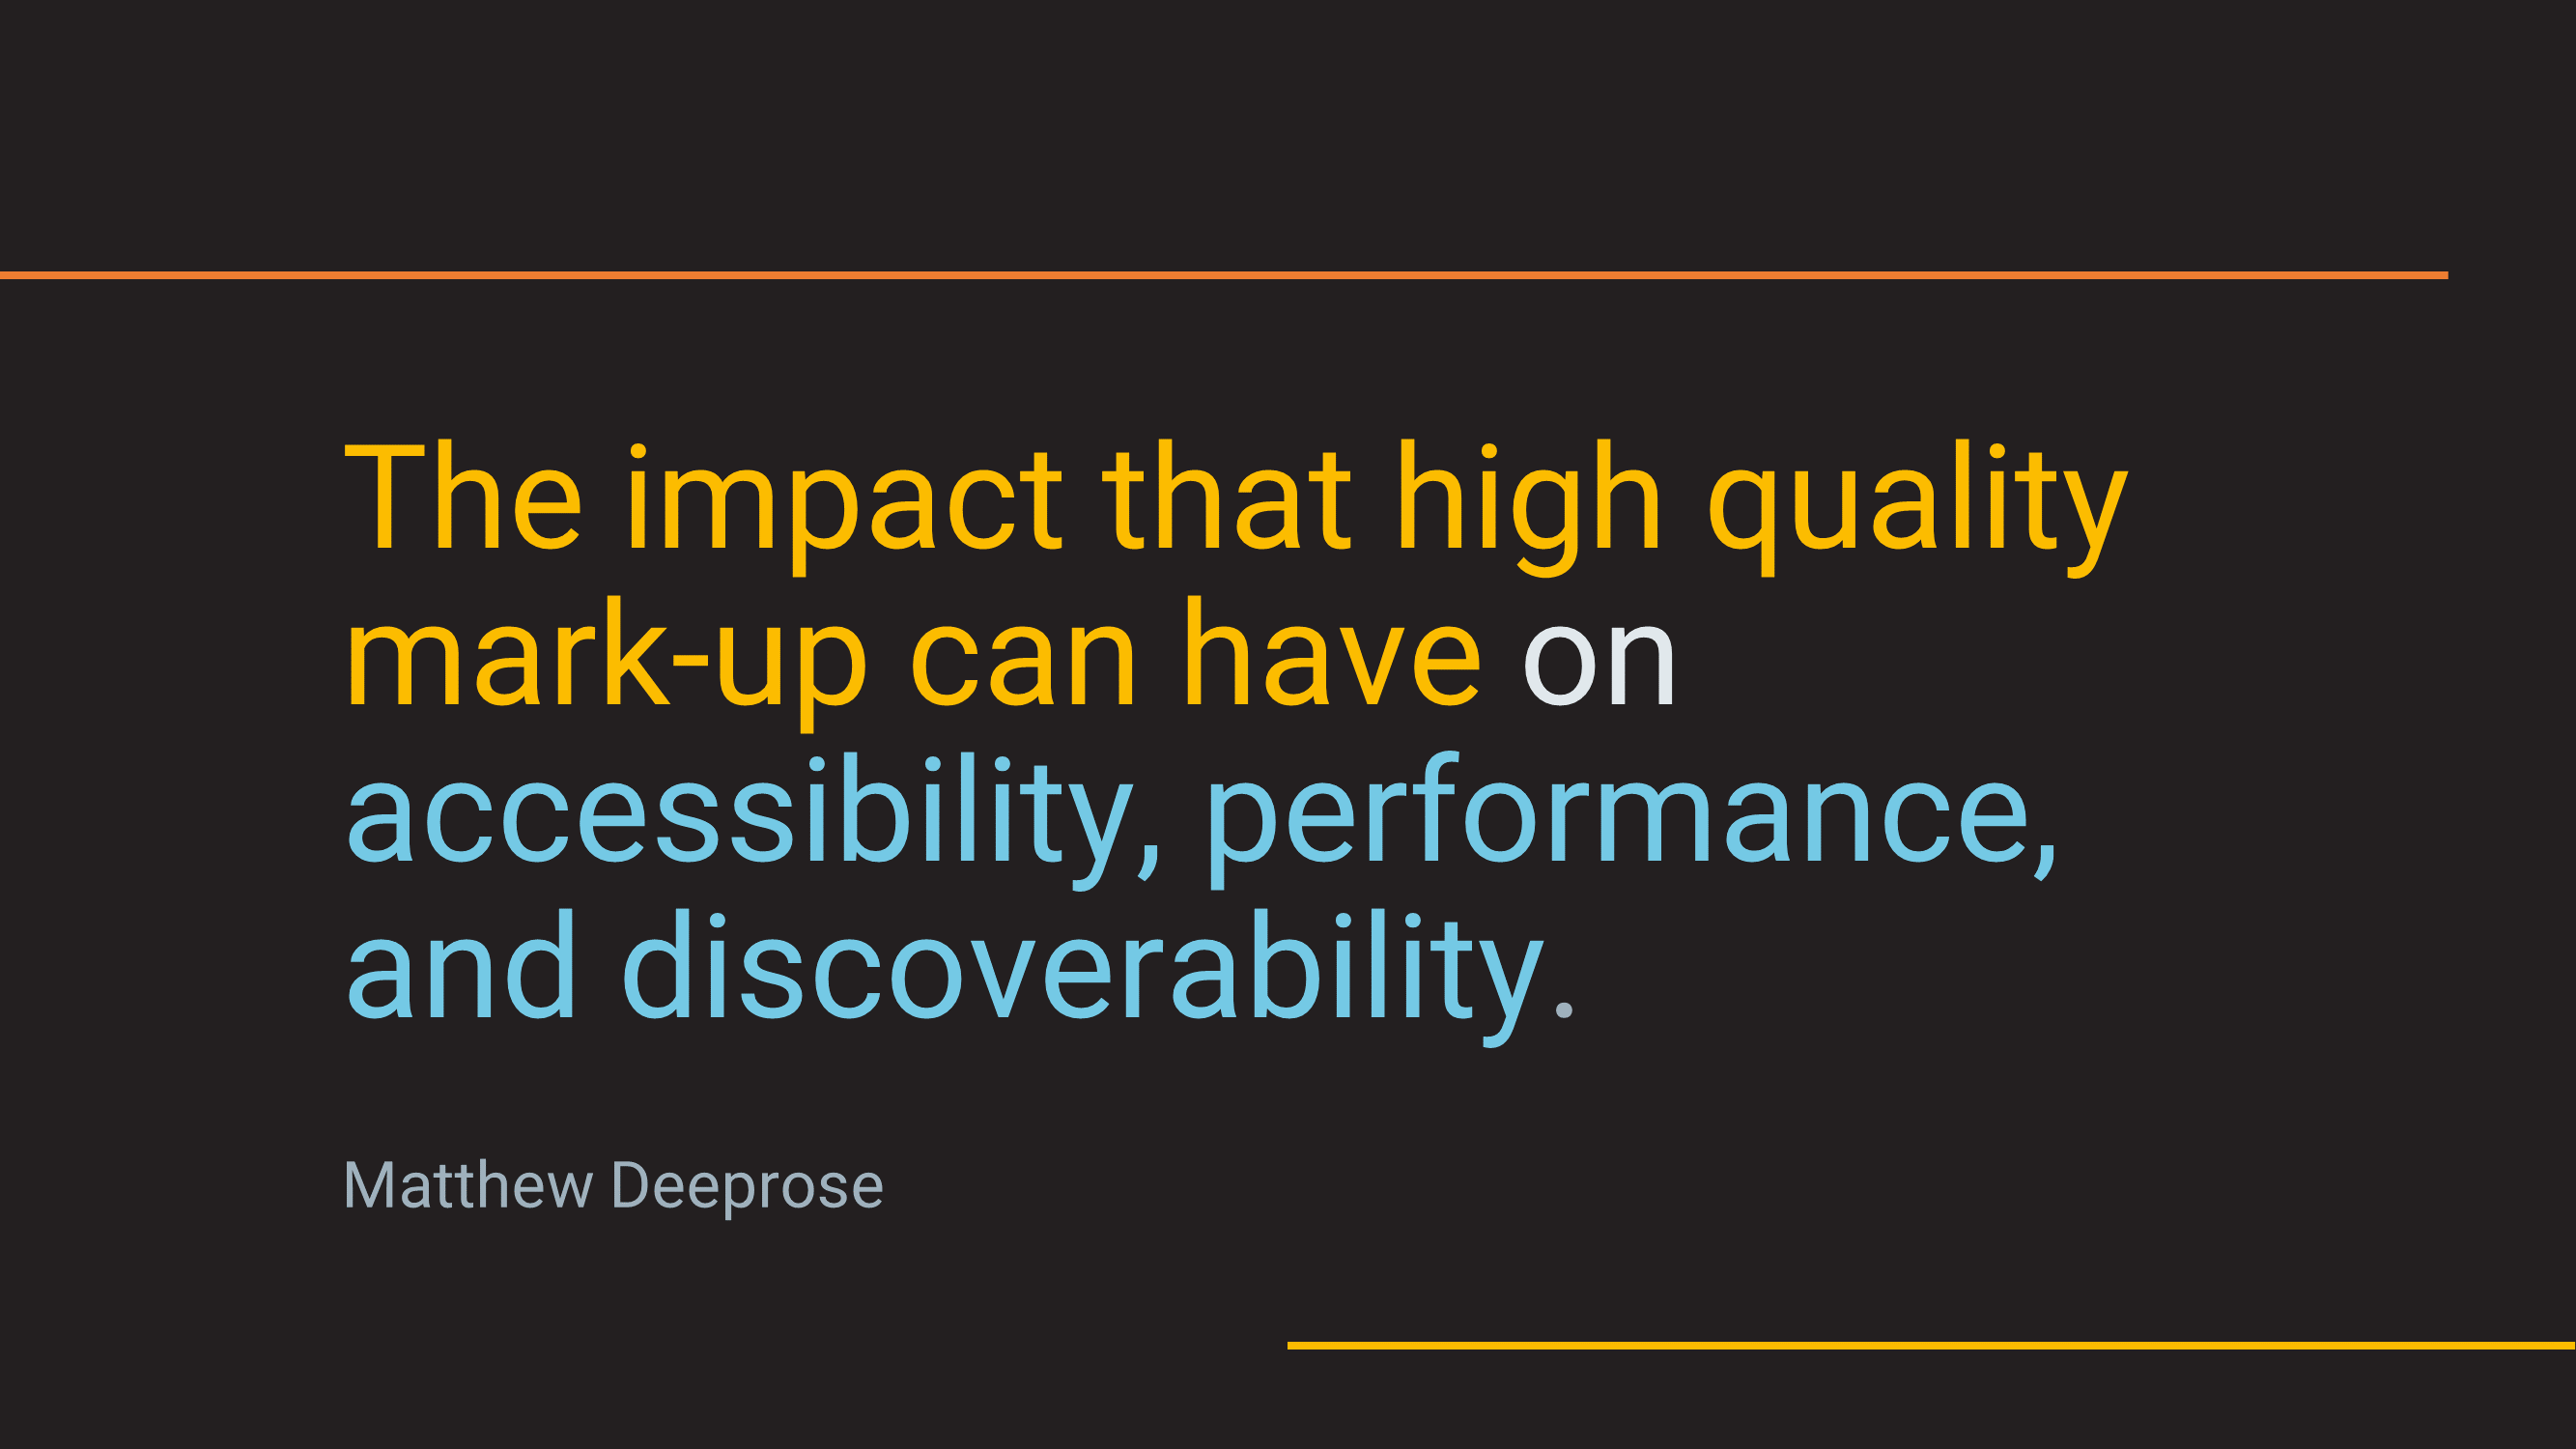 The impact that high quality mark-up can have on accessibility, performance, and discoverability.